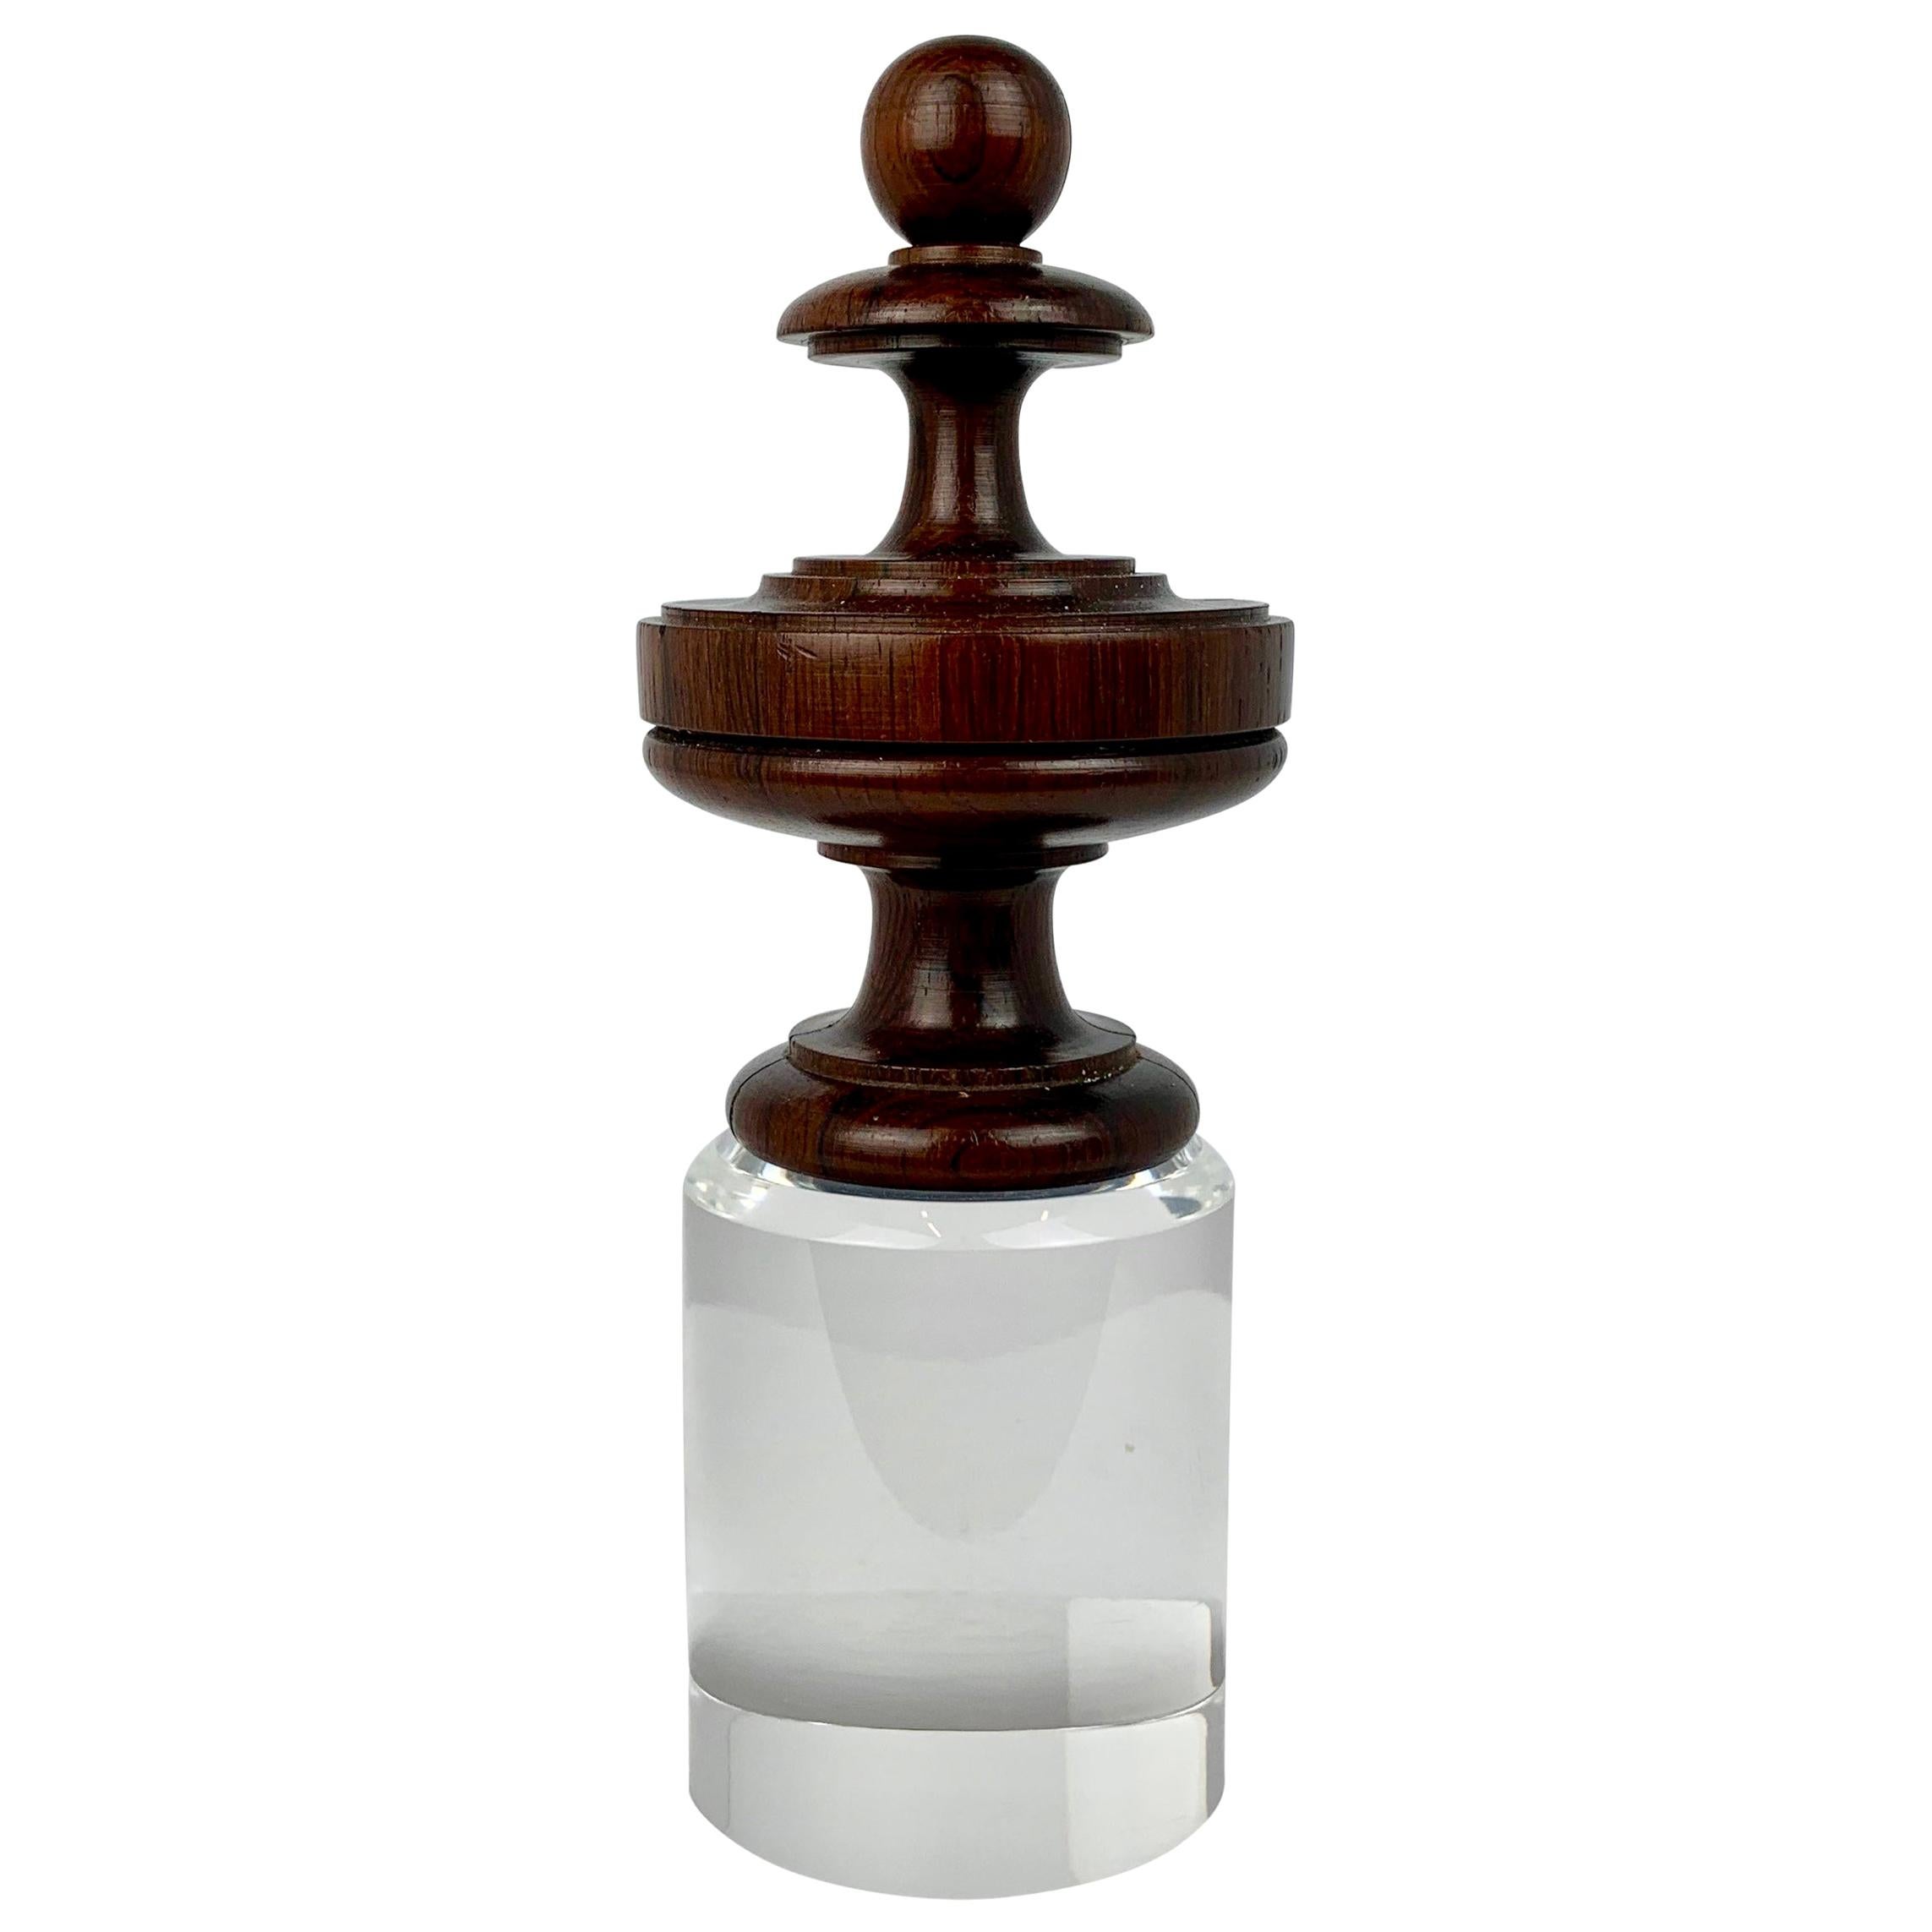 Rosewood Finial Mounted on a Custom Lucite Pedestal-American, 19 th c.